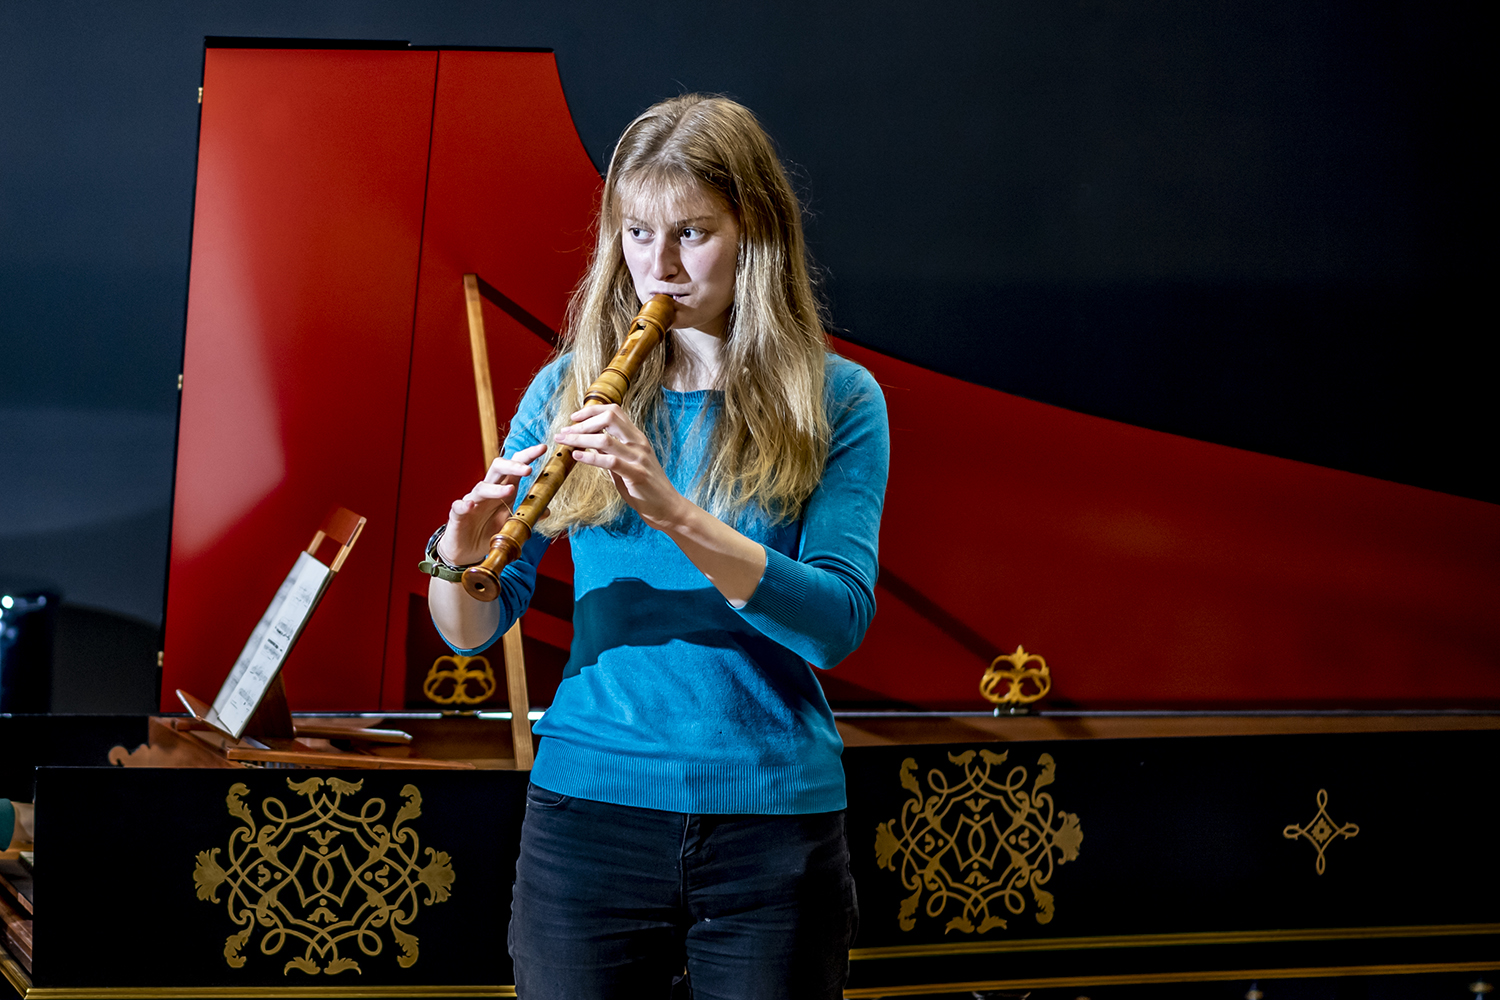 A woman with blonde hair and a blue jumper performing on a historical recorder in front of a harpsichord